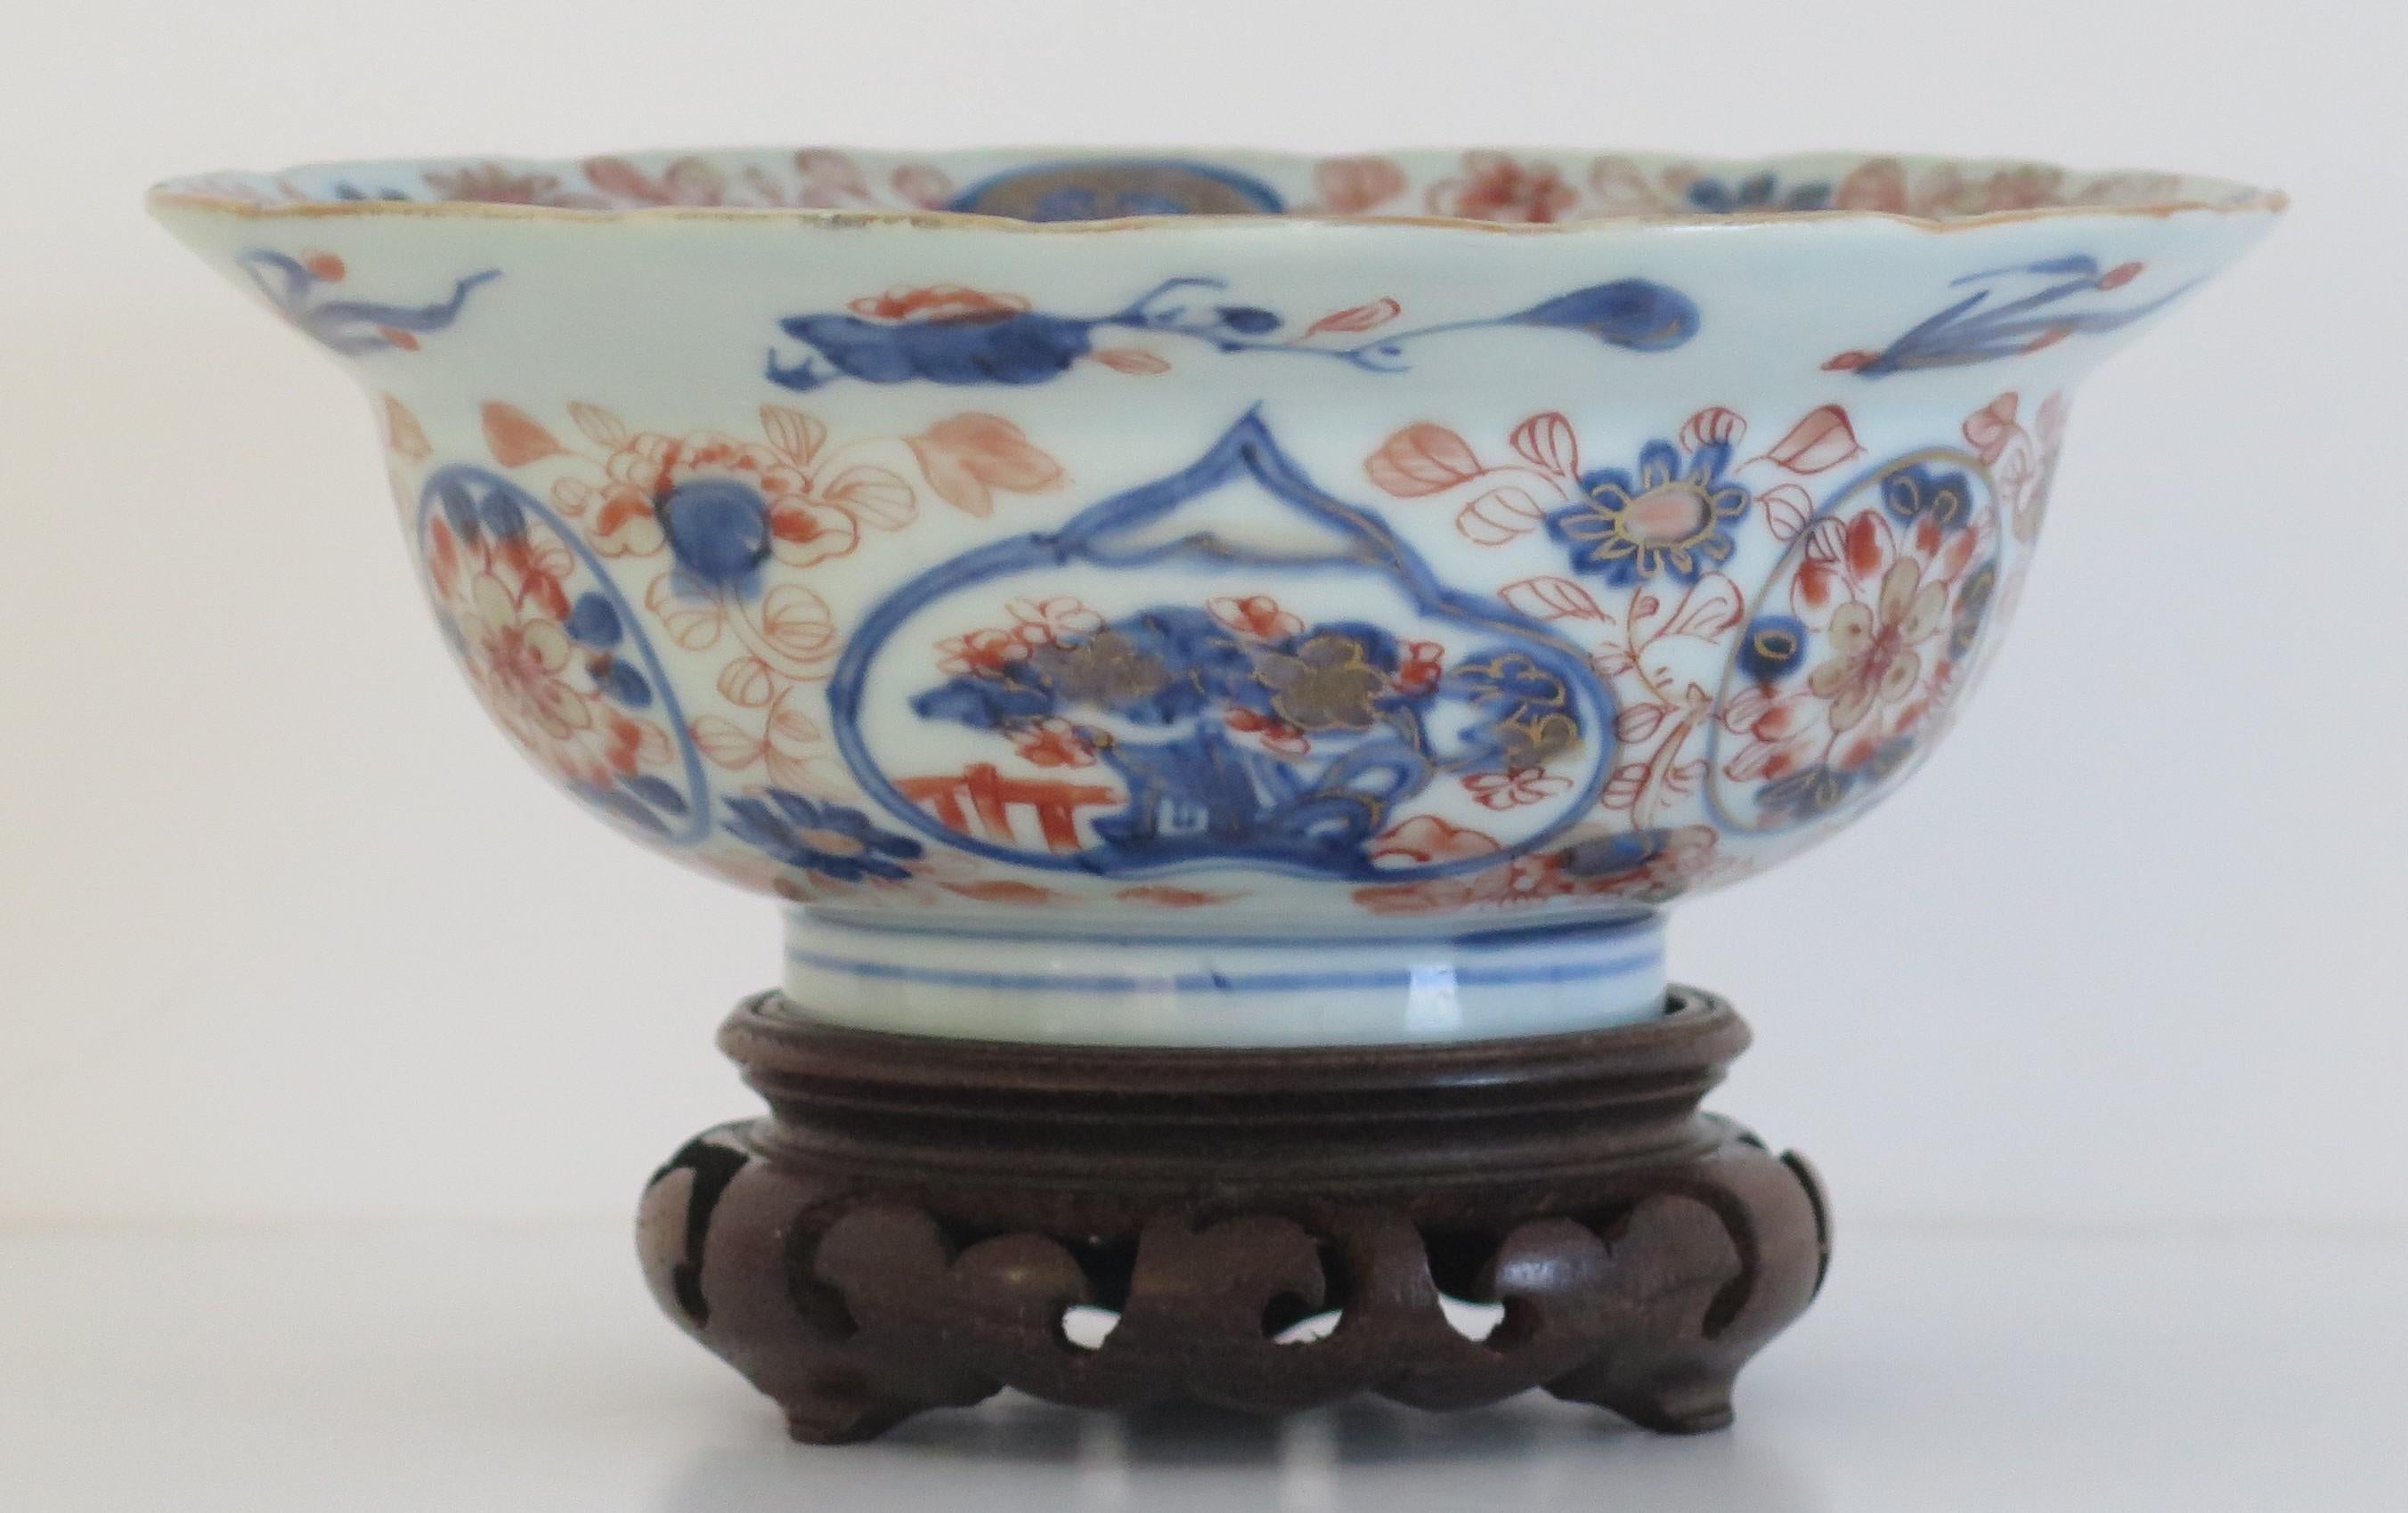 Chinese Export Porcelain Imari Bowl with Wood Stand, Qing Kangxi, Circa 1700 For Sale 2